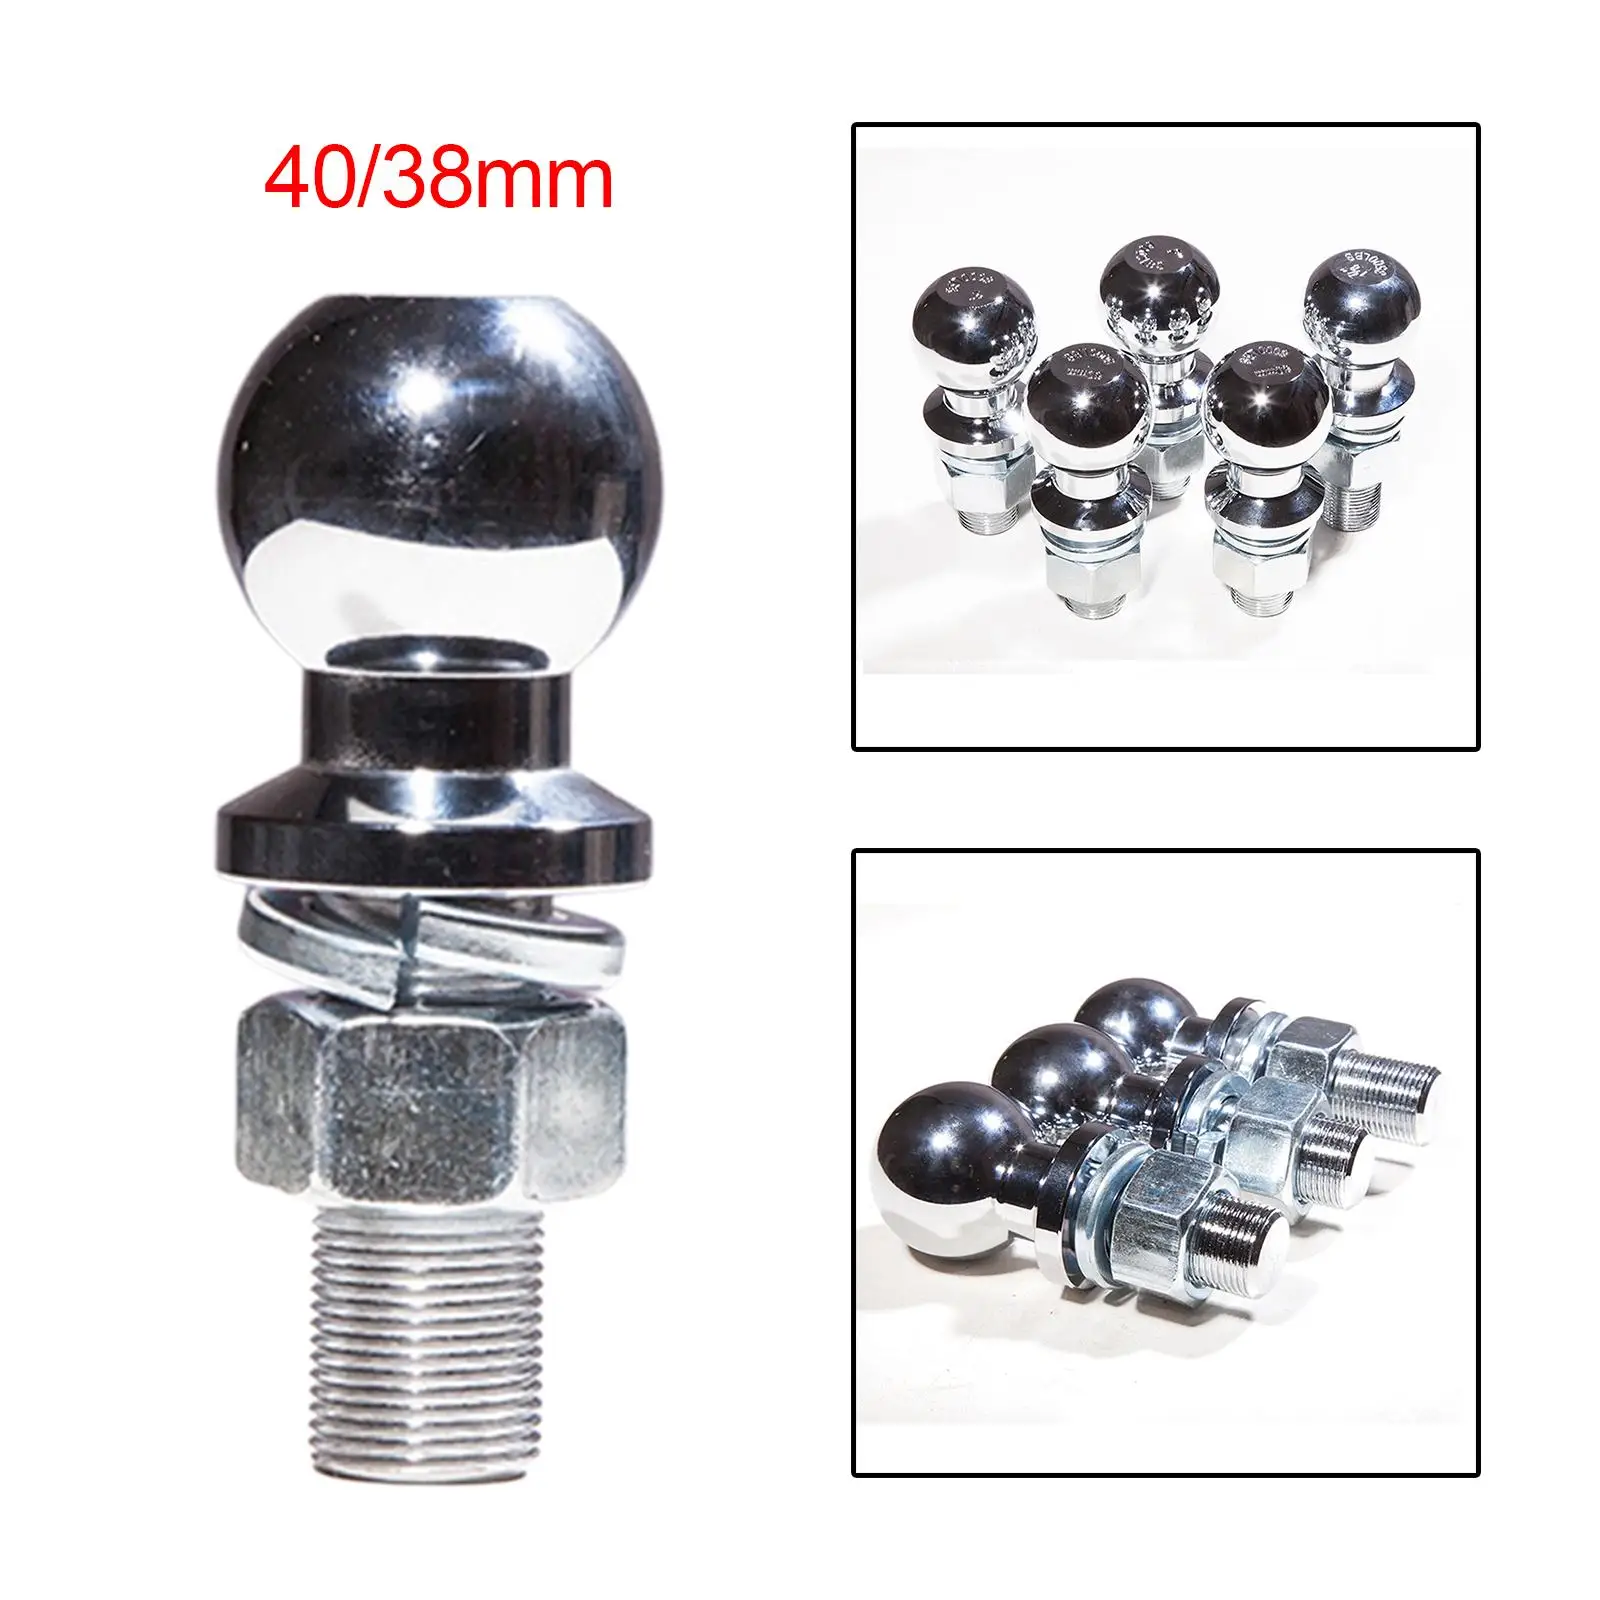 Trailer Hitch Ball 2 inch Spare Parts Portable Durable Accessory Trailer Connector Ball Head for Vehicle Yacht RV